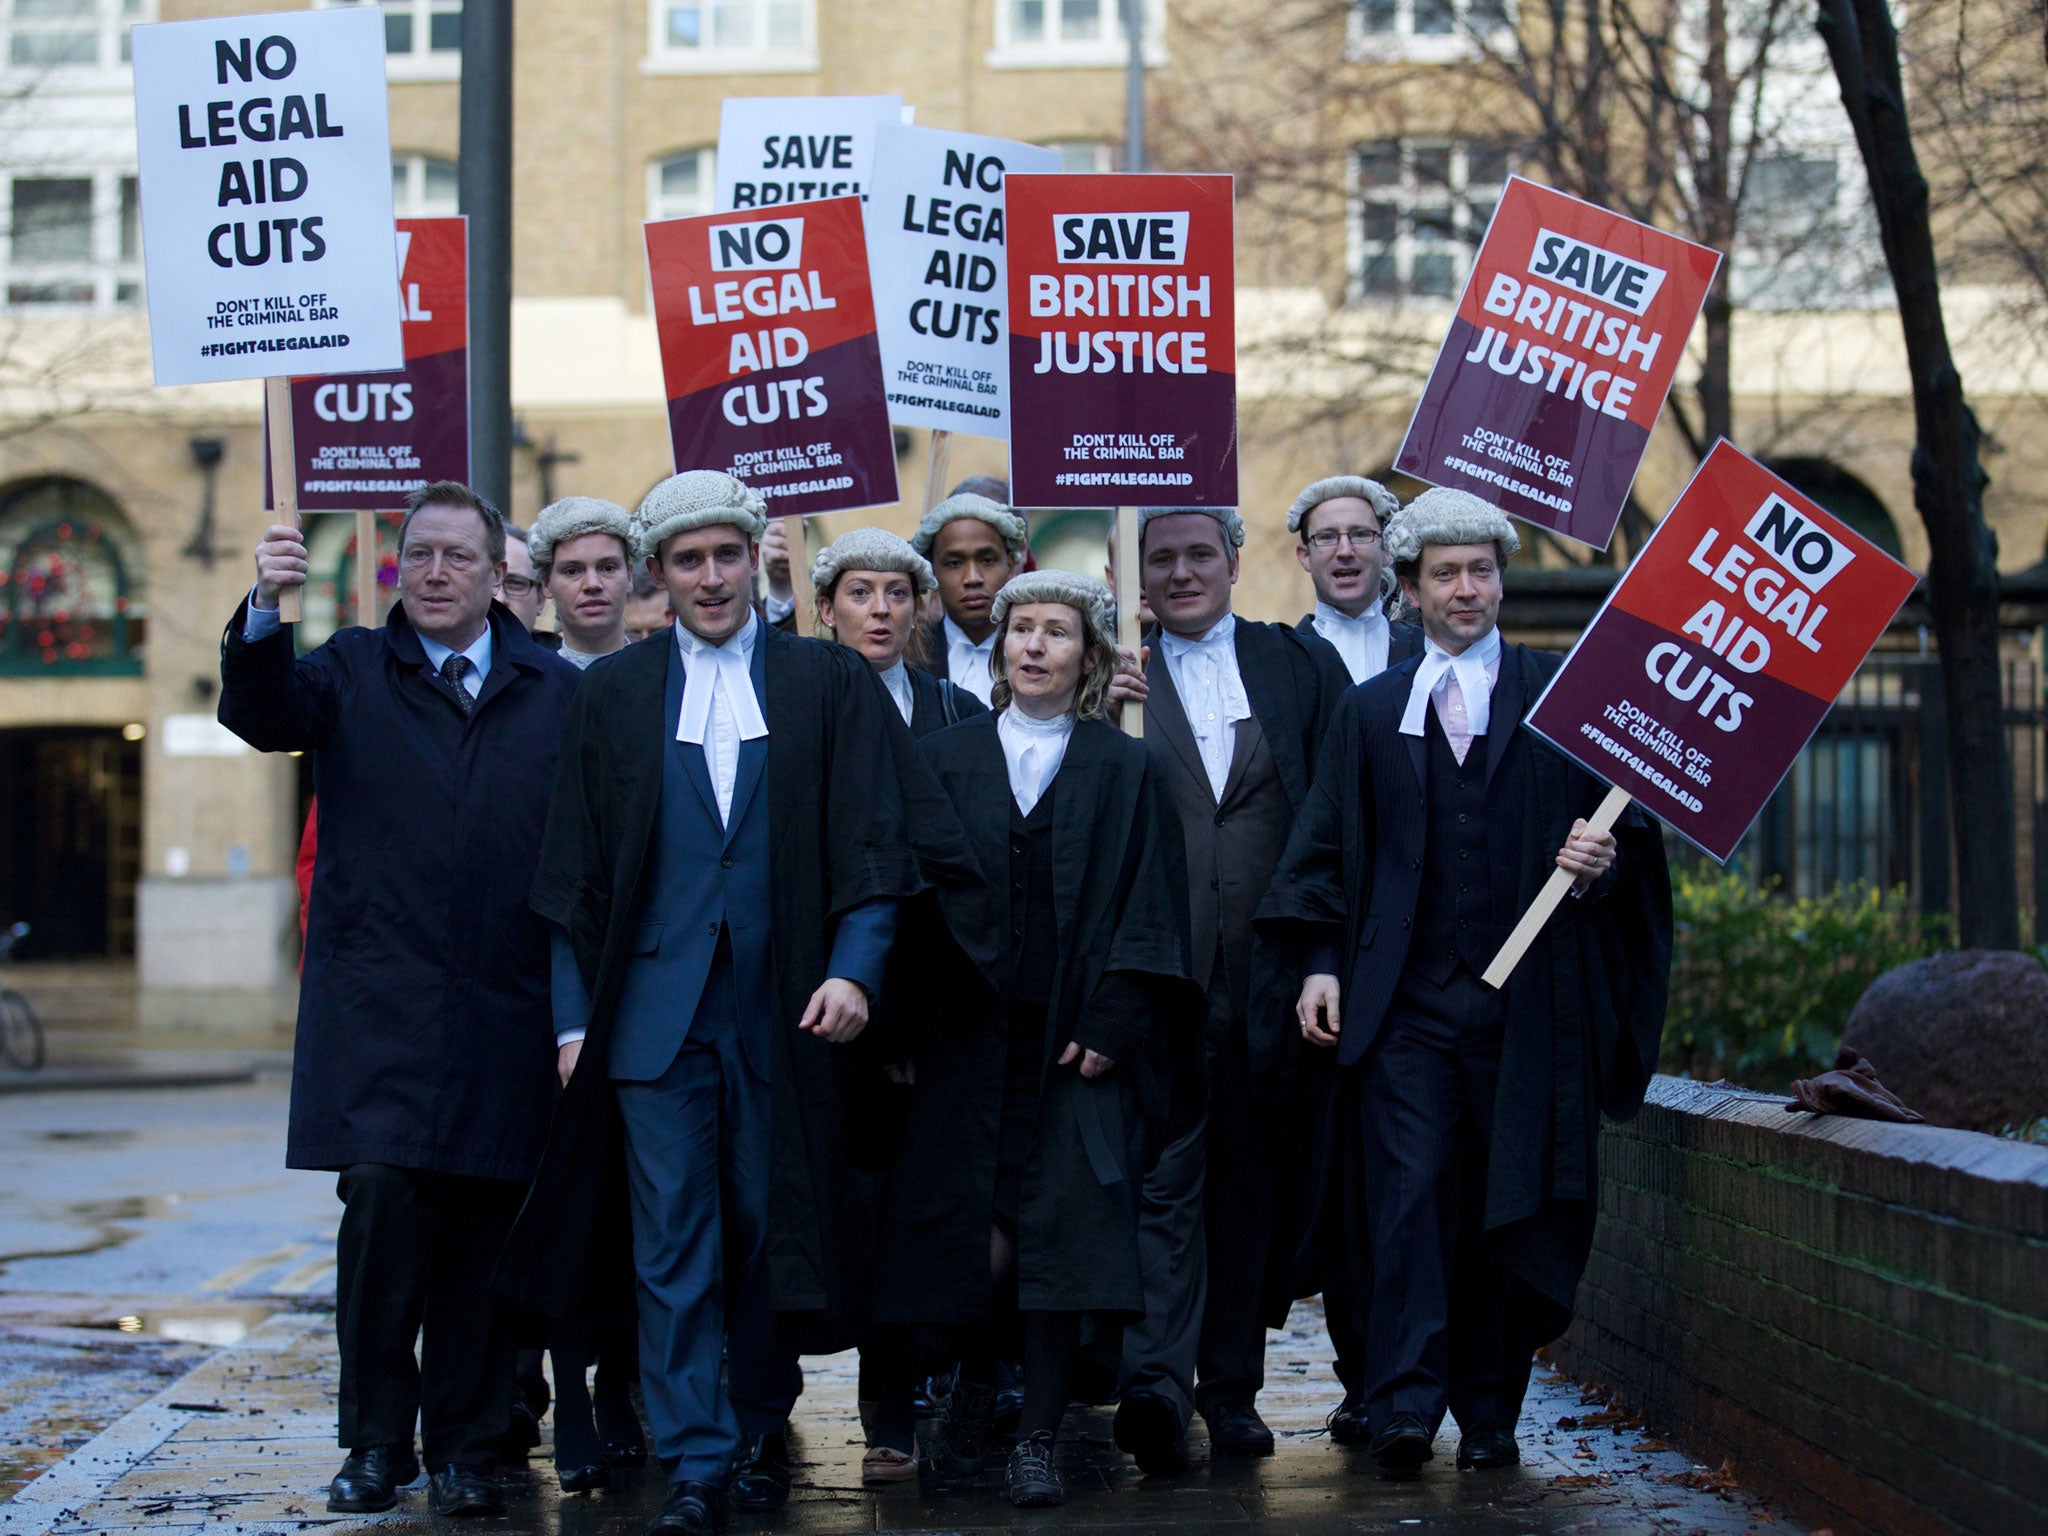 Legal professionals hold placards during a protest against cuts to the legal aid budget on 6 January. The number of separating couples accessing publicly funded mediation or family lawyers have fallen dramatically due to the changes to legal aid